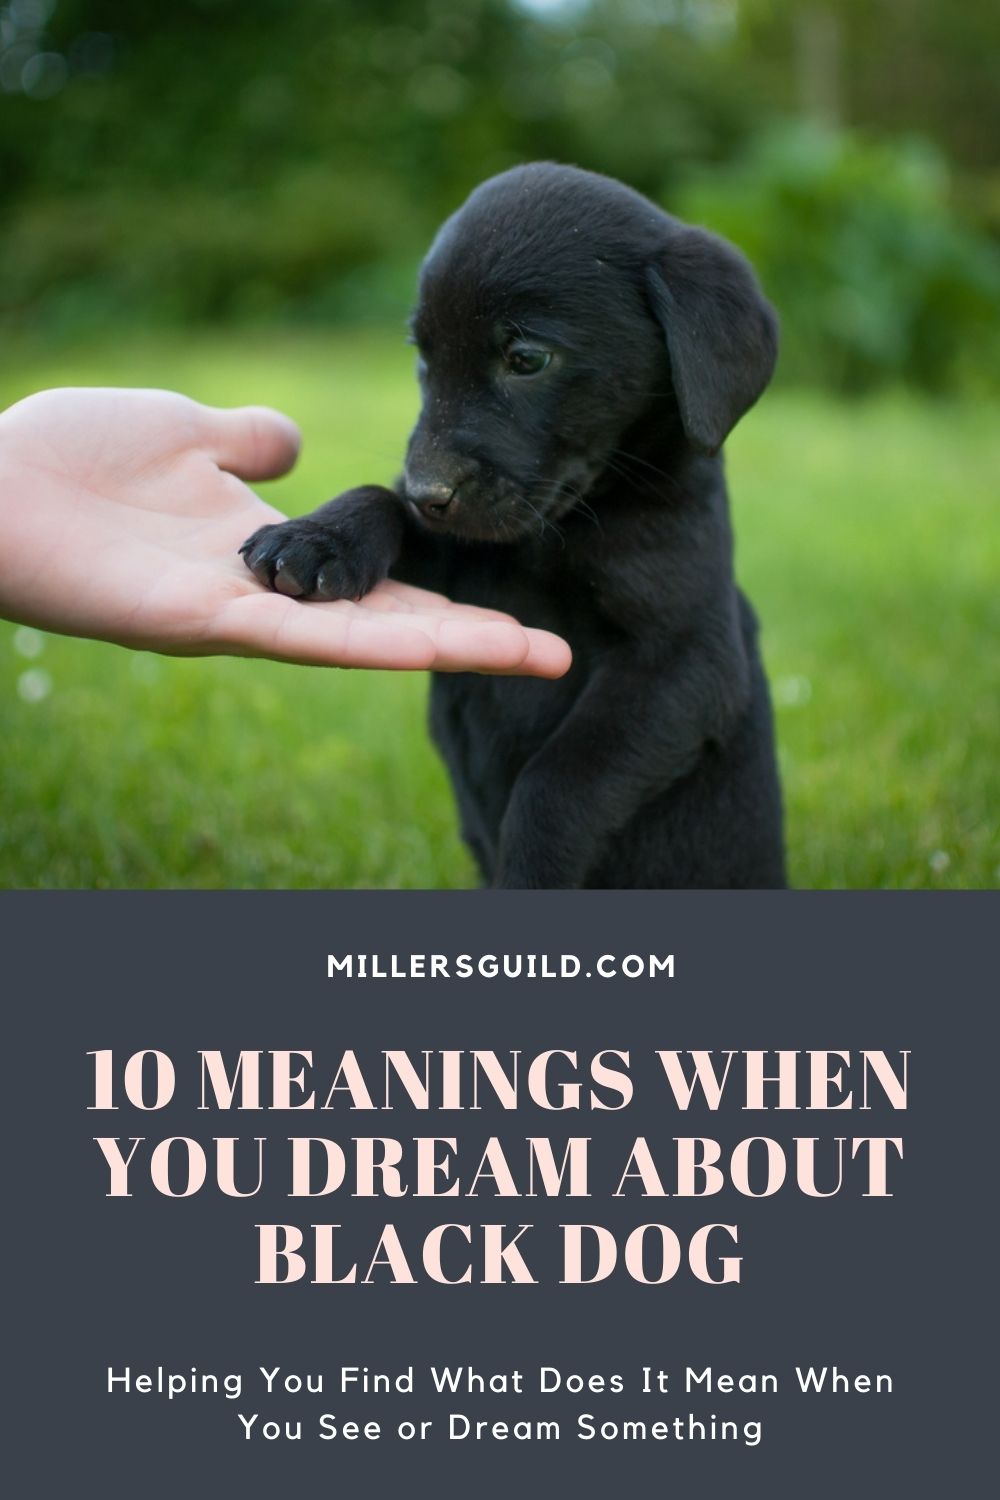 10 Meanings When You Dream about Black Dog